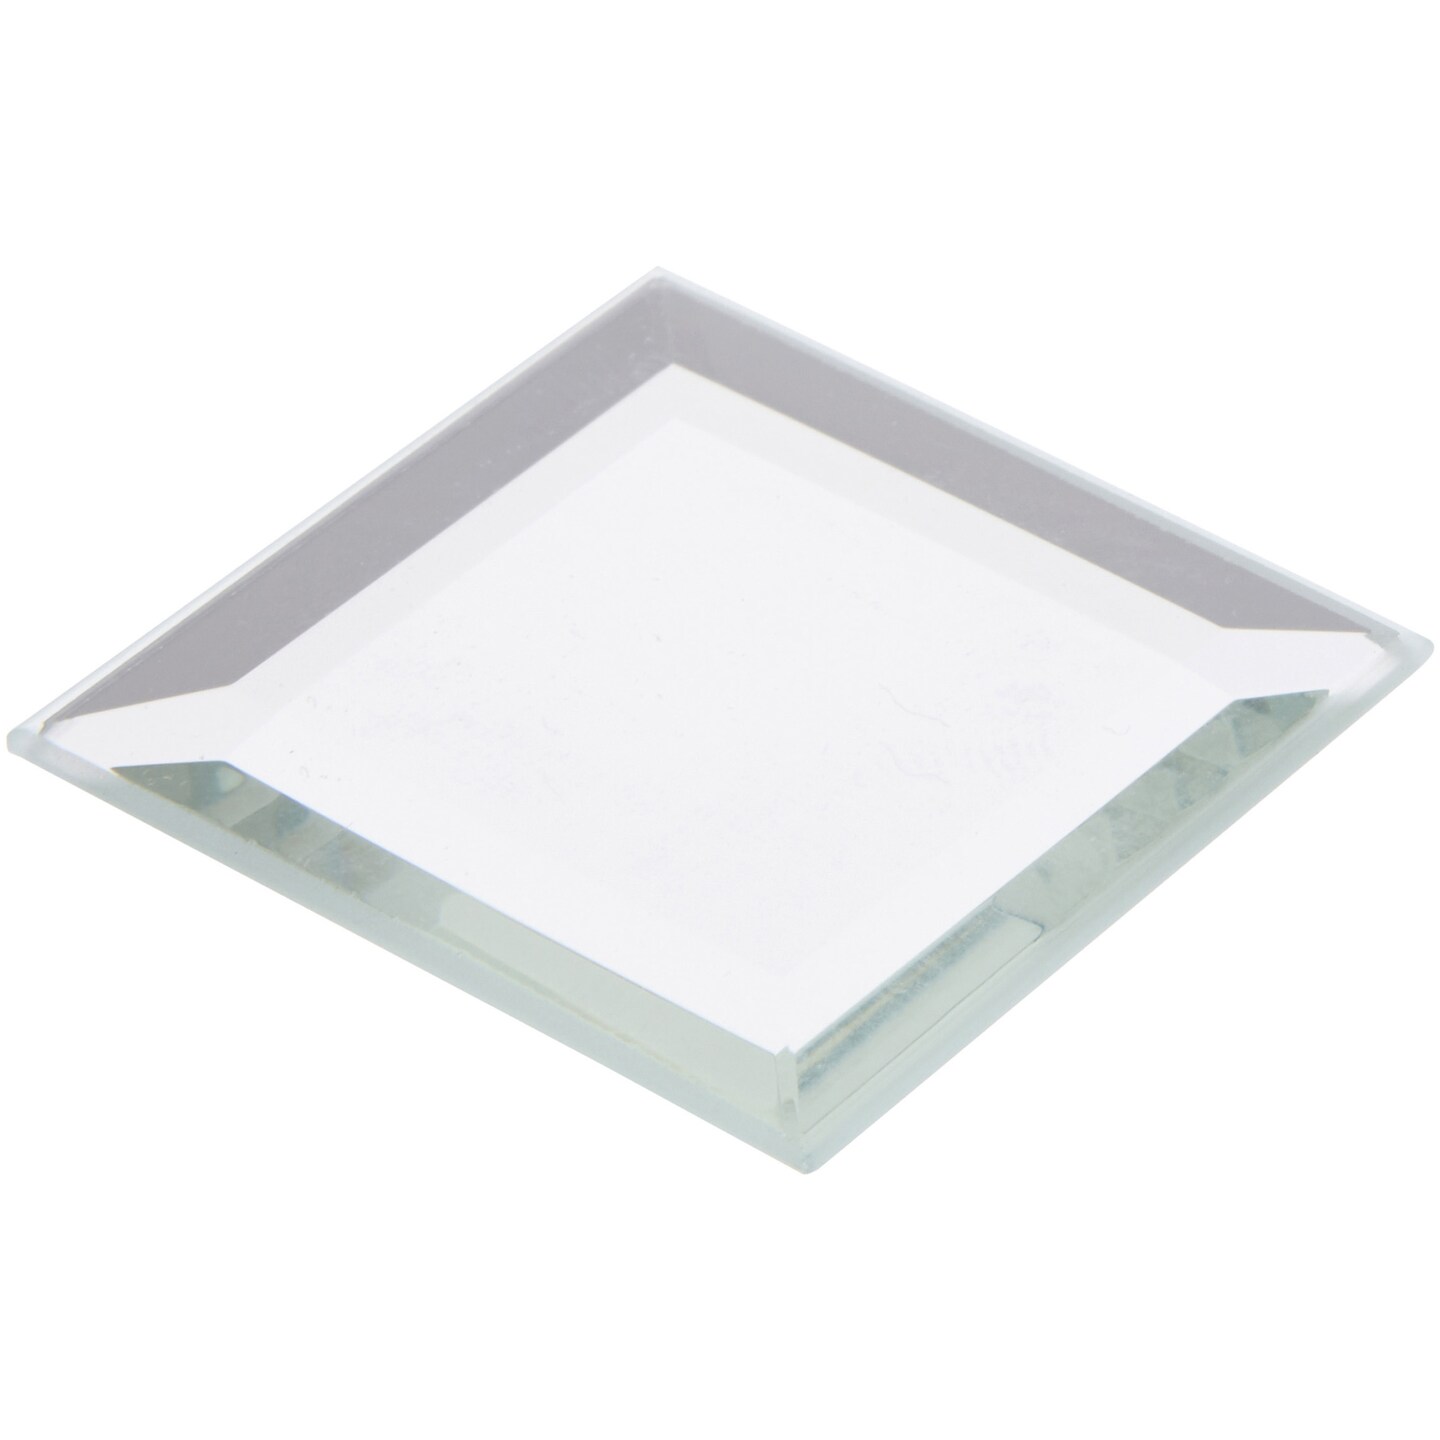 Plymor Square 3mm Beveled Glass Mirror, 1.5 inch x 1.5 inch